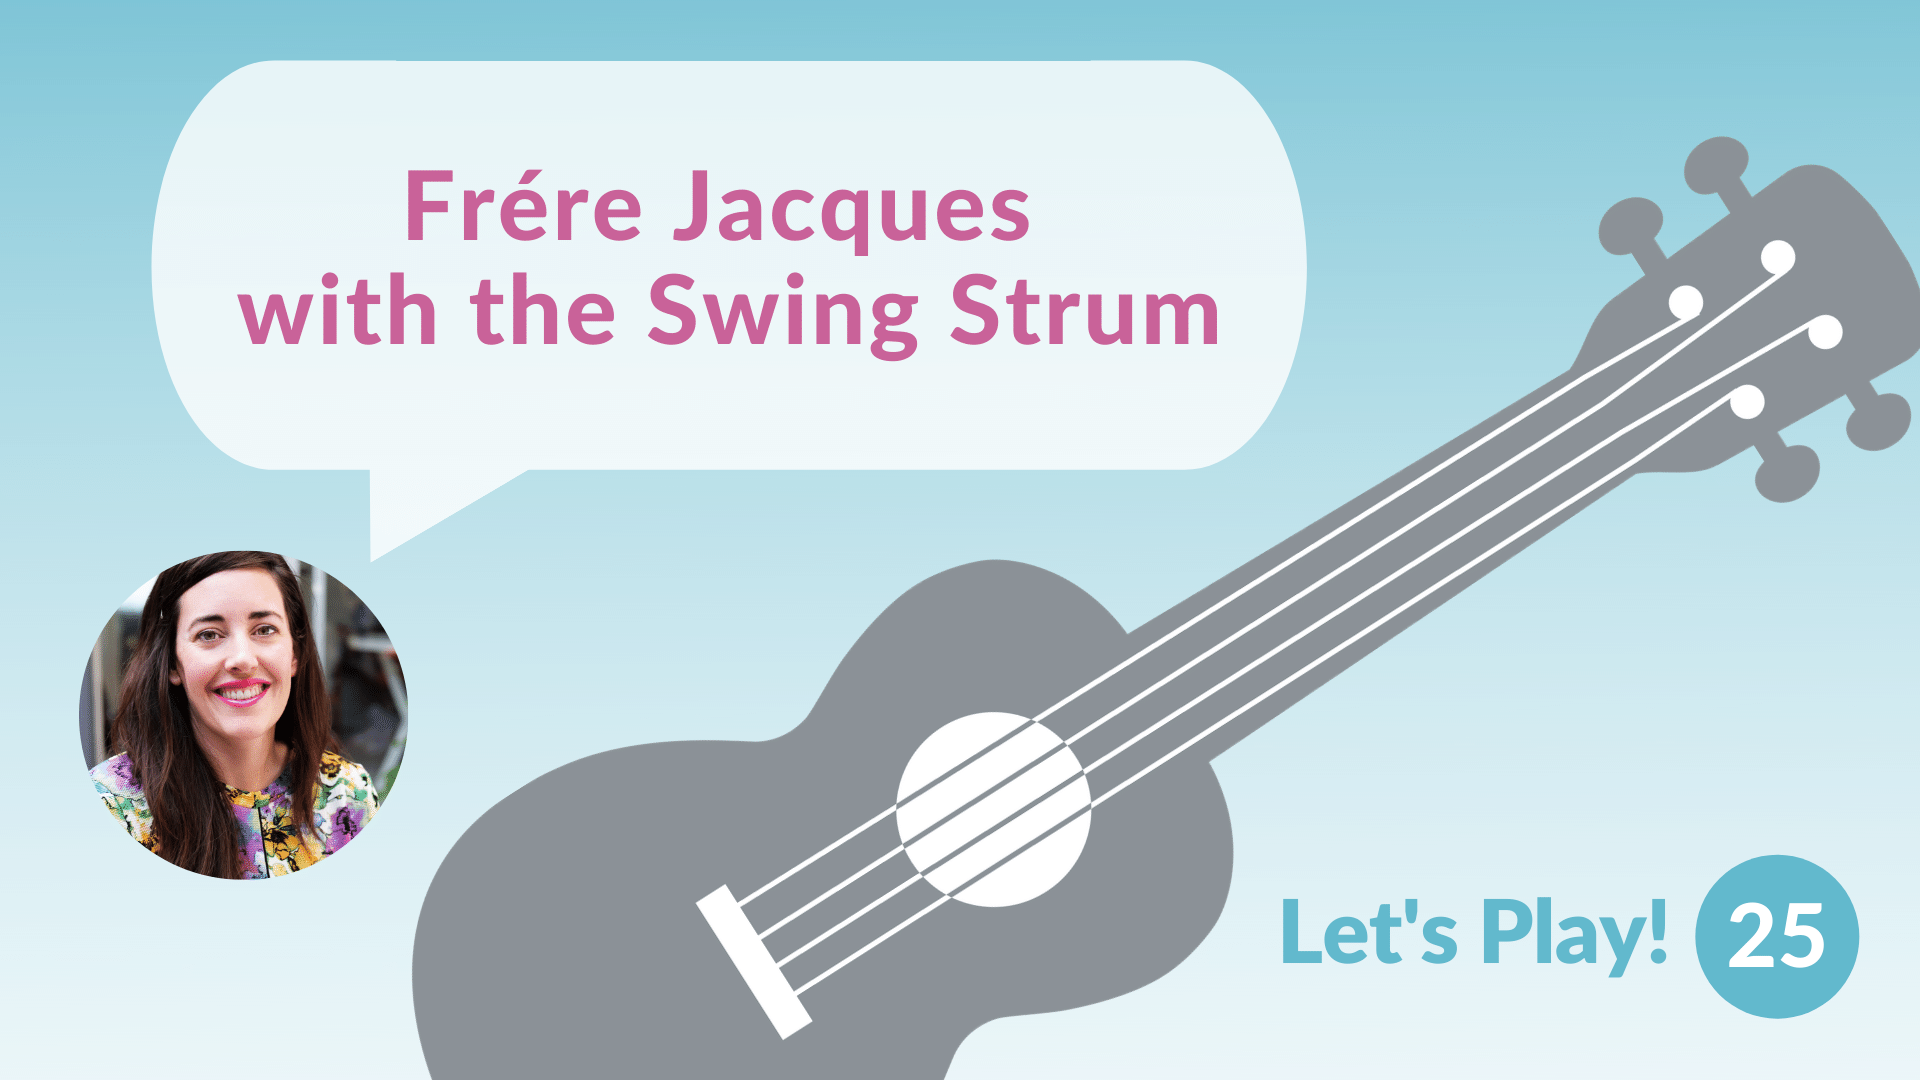 Play Frére Jacques with the Swing Strum